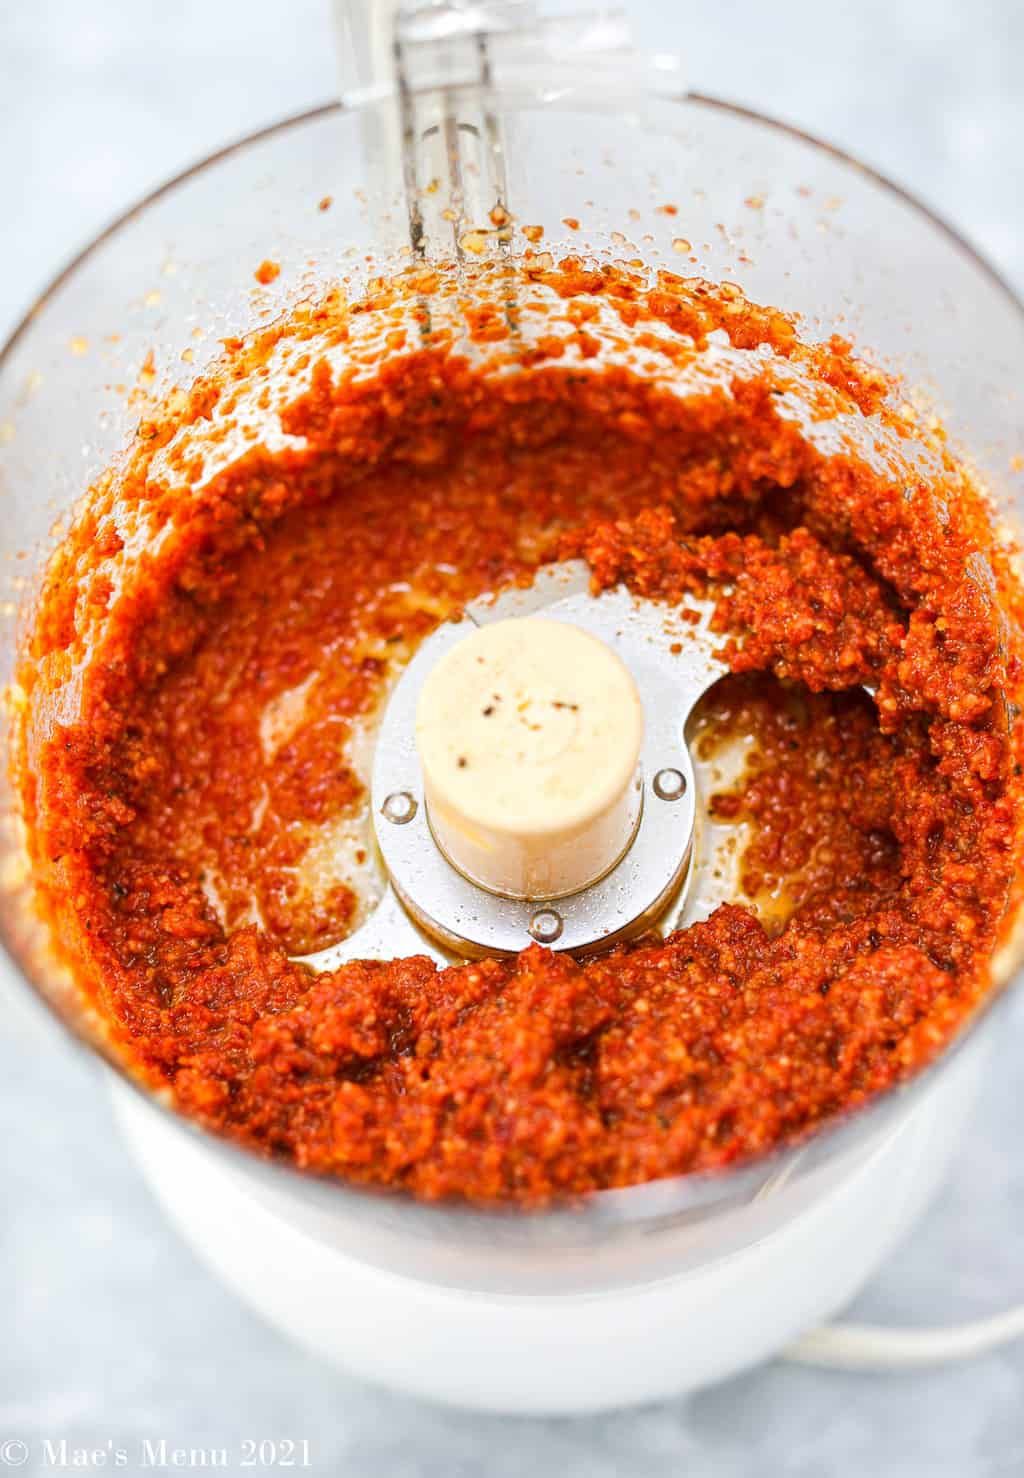 Tomato pesto blended up in the food processor